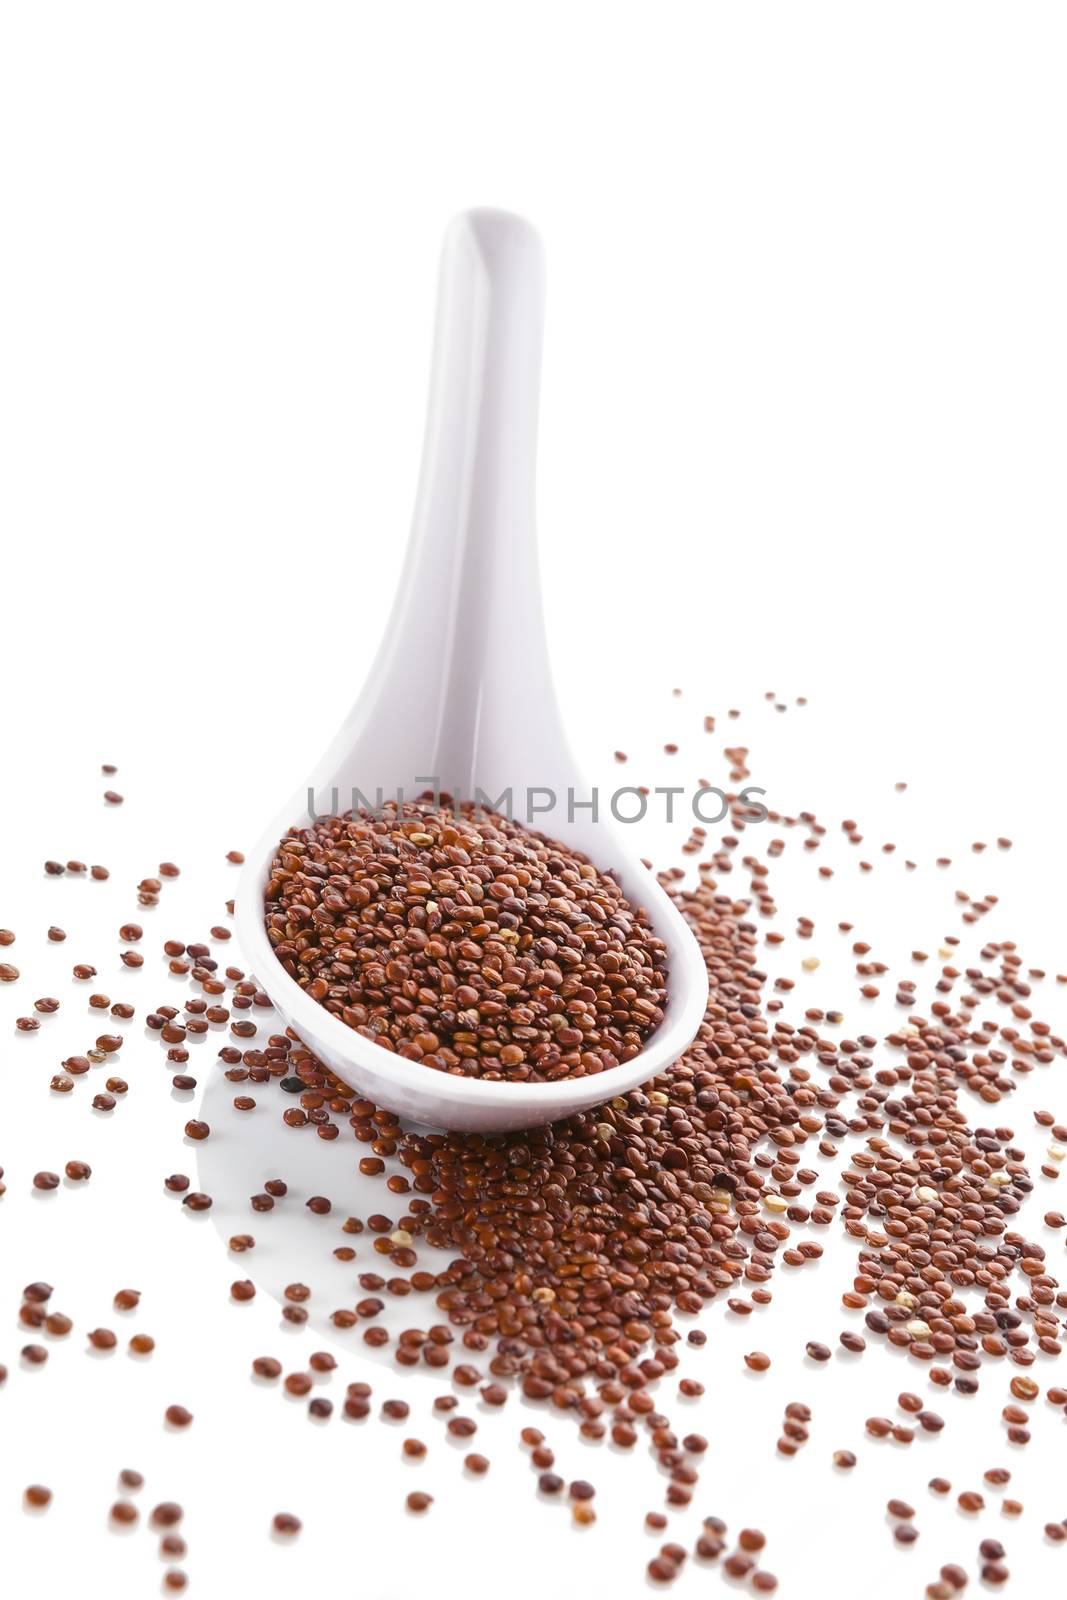 Red Quinoa seeds. by eskymaks